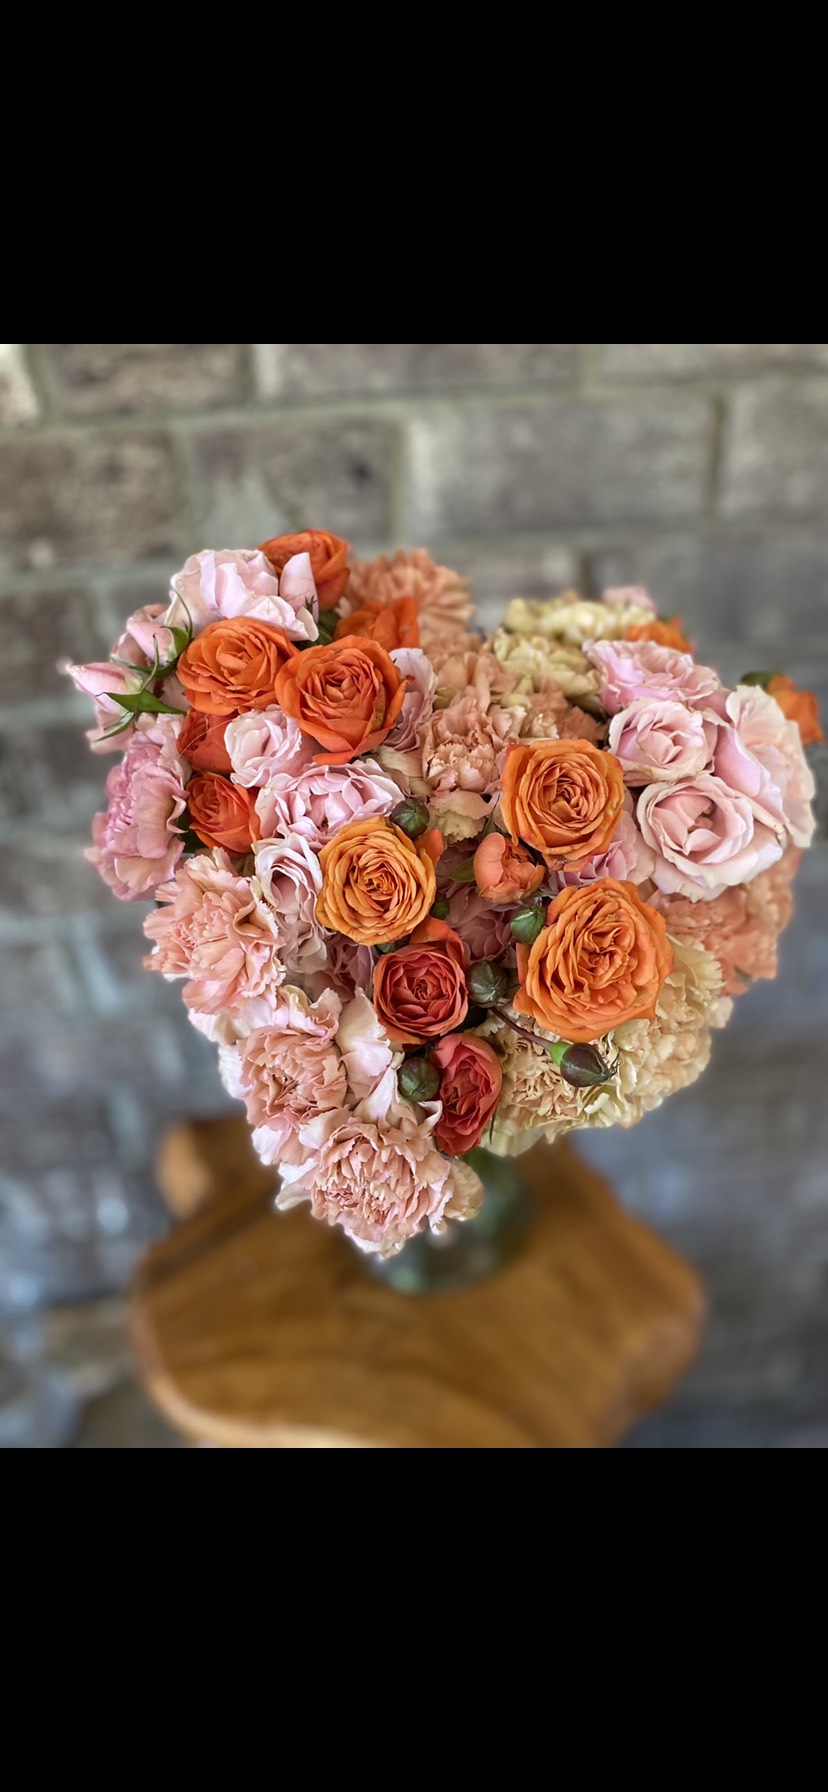 Galentine's Day Floral Bouquet Workshop with Local Floral Designer Pia Geraghty